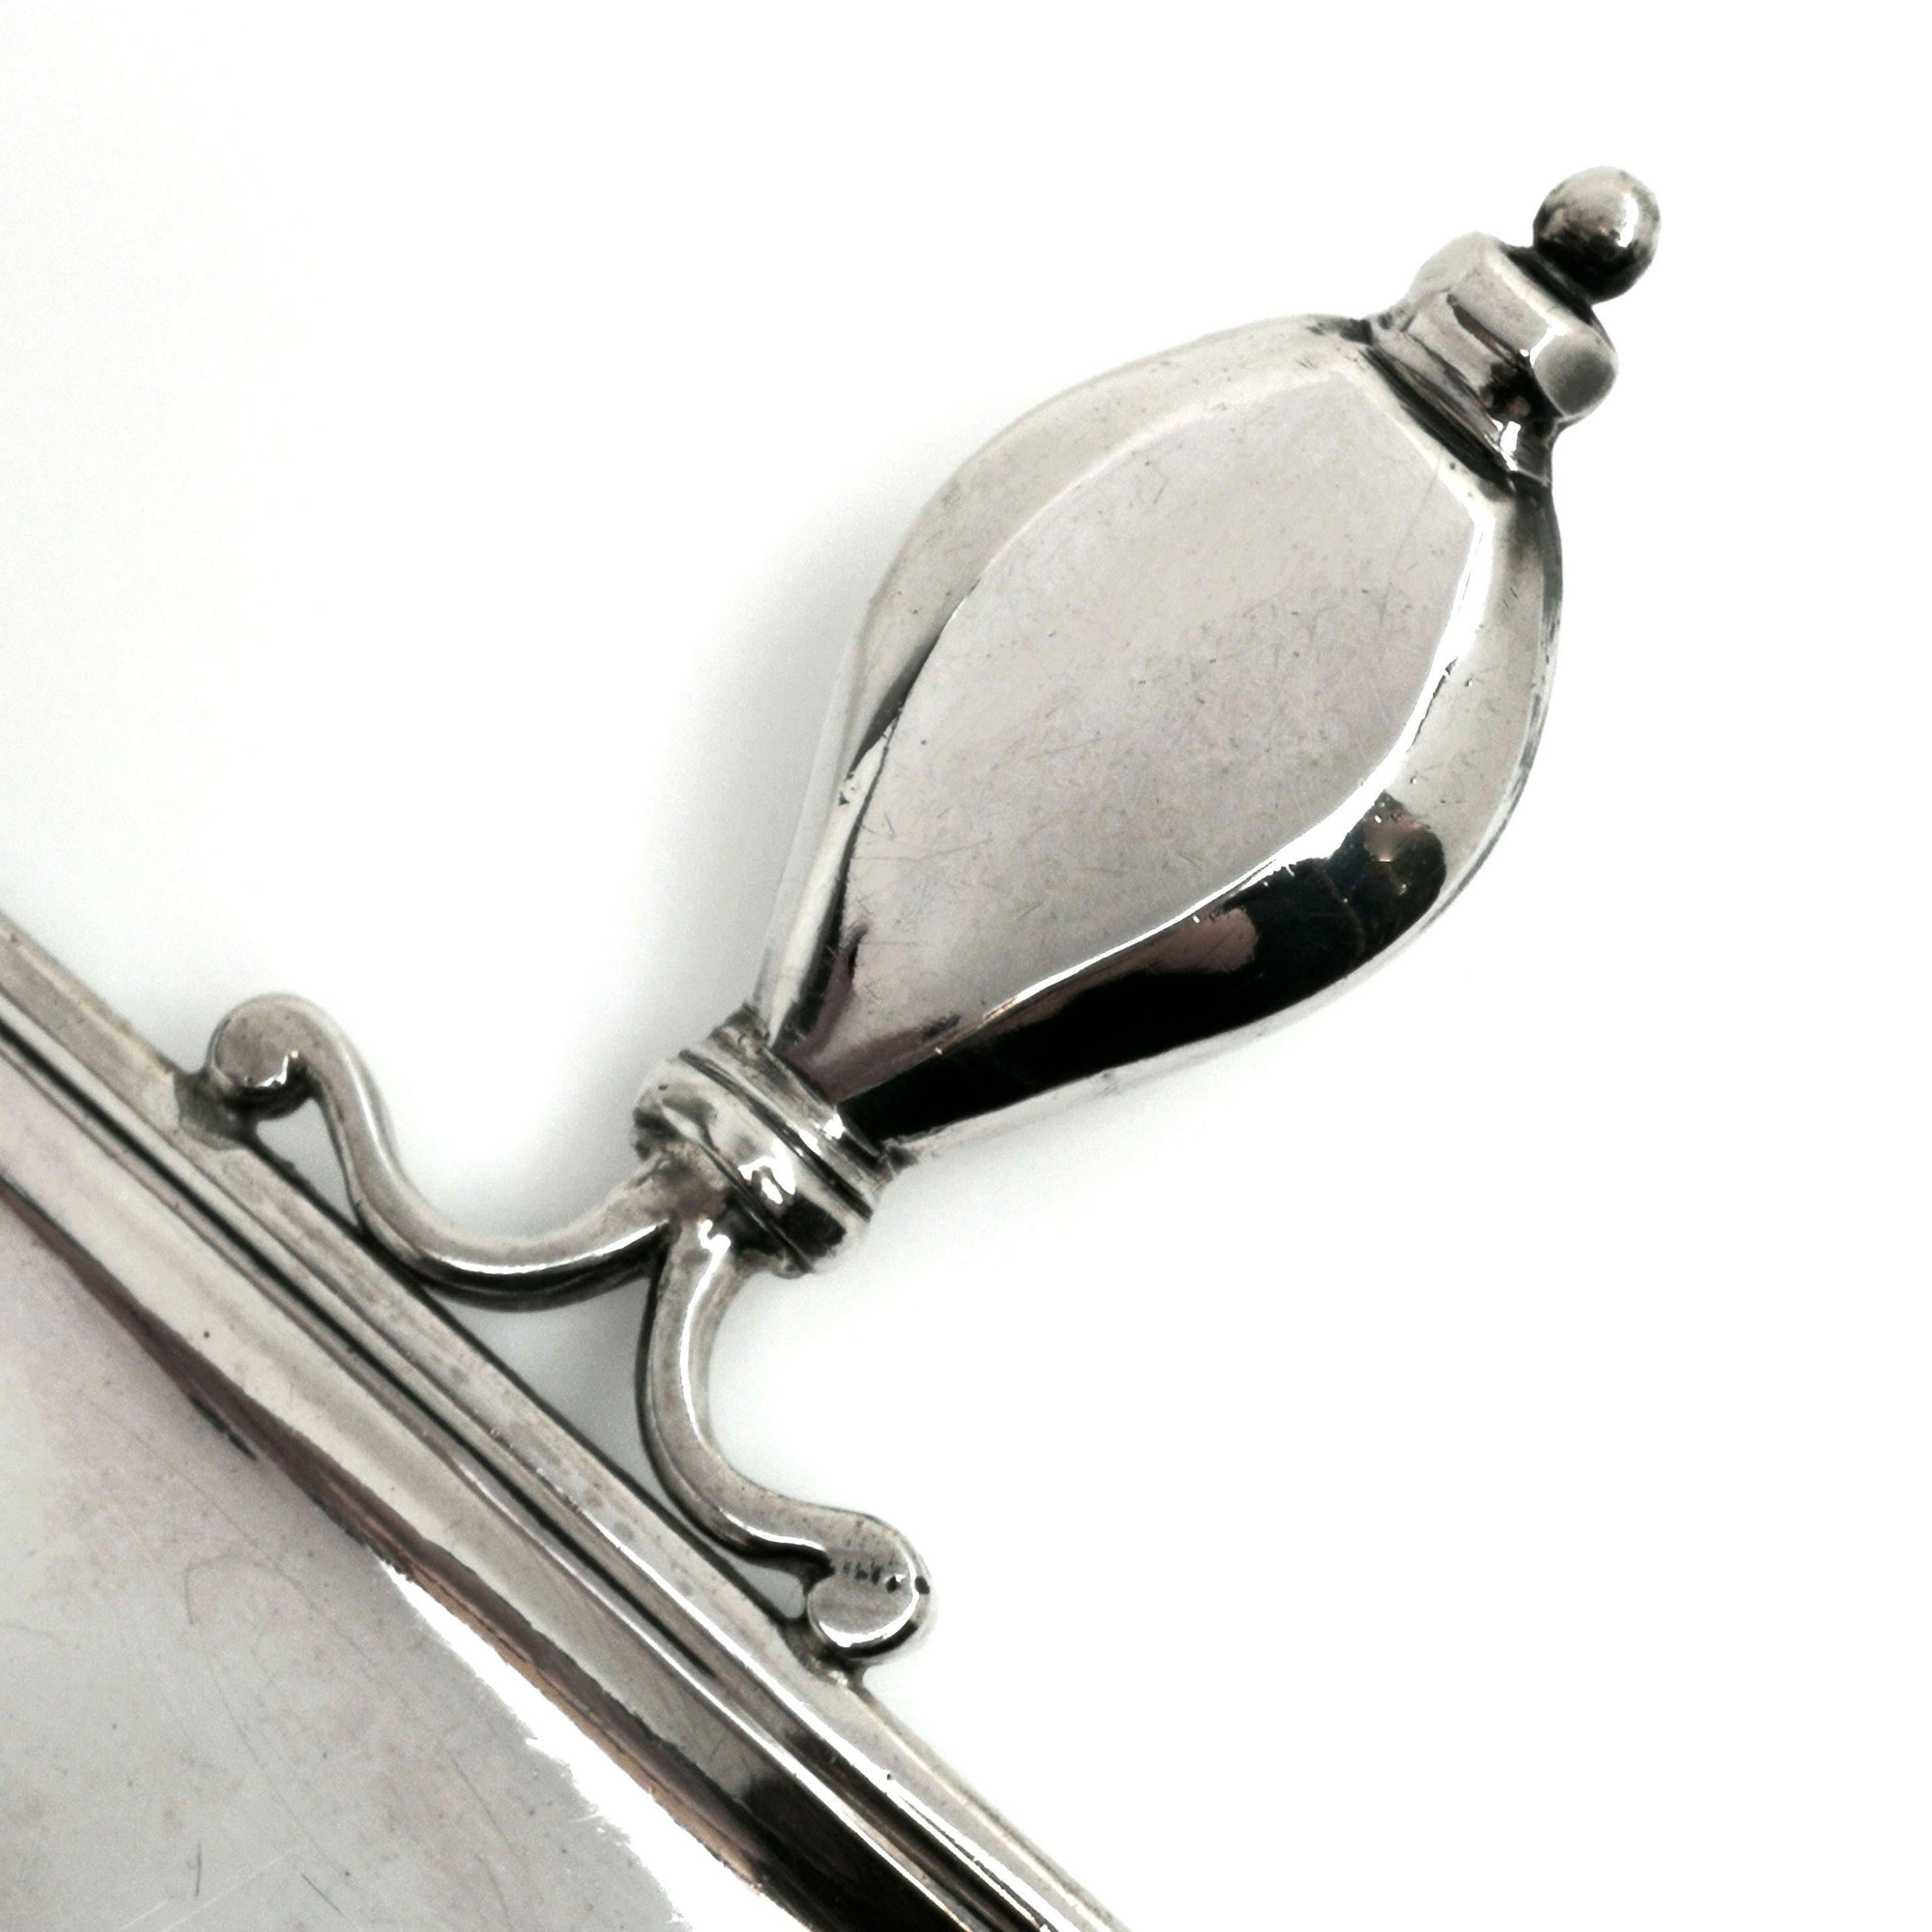 A lovely early Georgian George I solid silver spoon handled Snuffer Tray. The Tray has an elongated octagonal shape with a substantial spoon handle and stands on four circular feet. Perfect for Snuffers but also ideal for pens on a desk. 
 
 Made